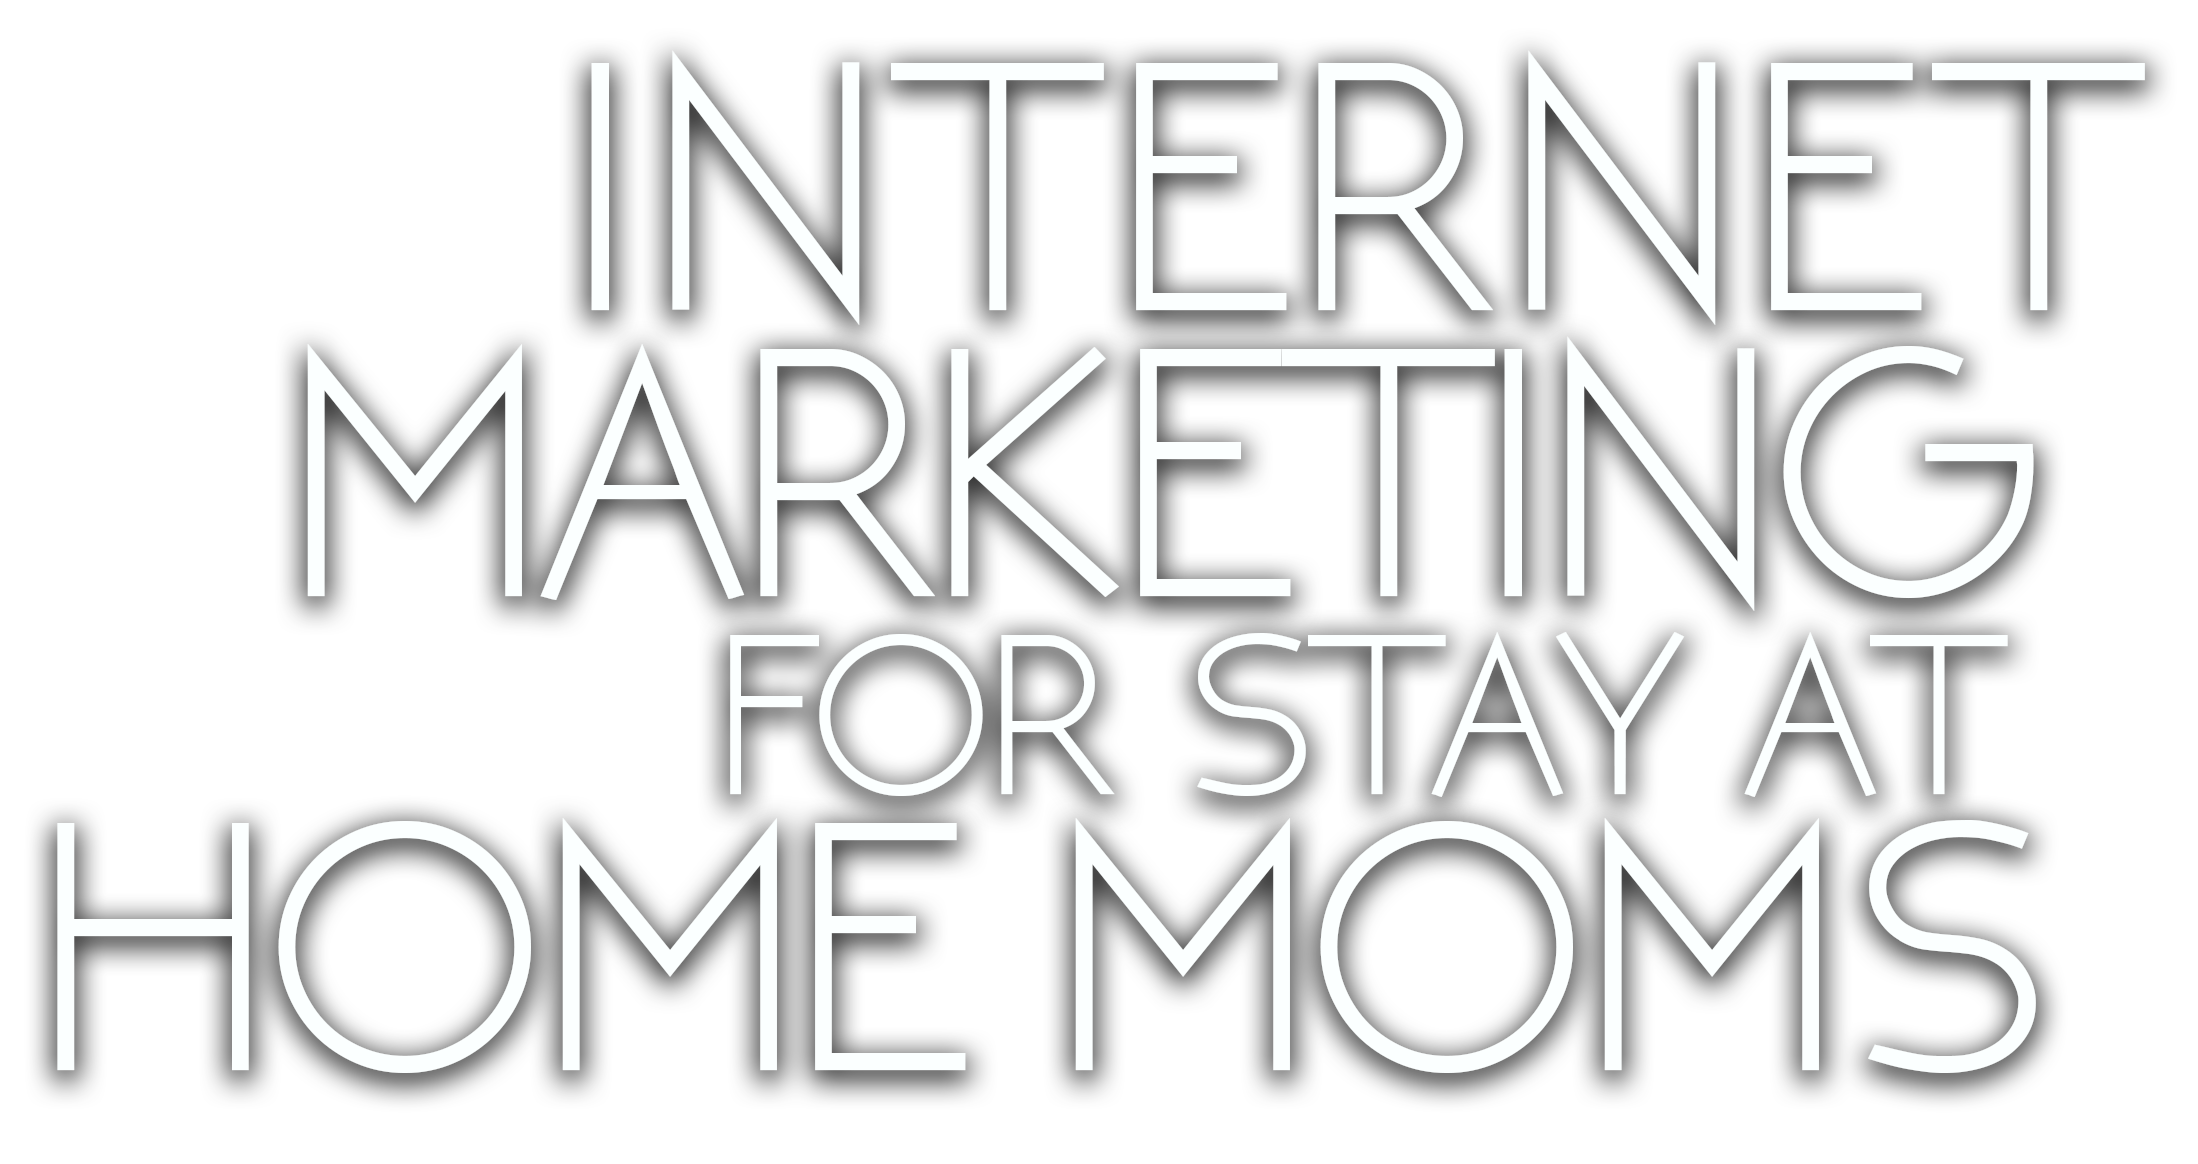 Internet Marketing For Stay-At-Home Moms